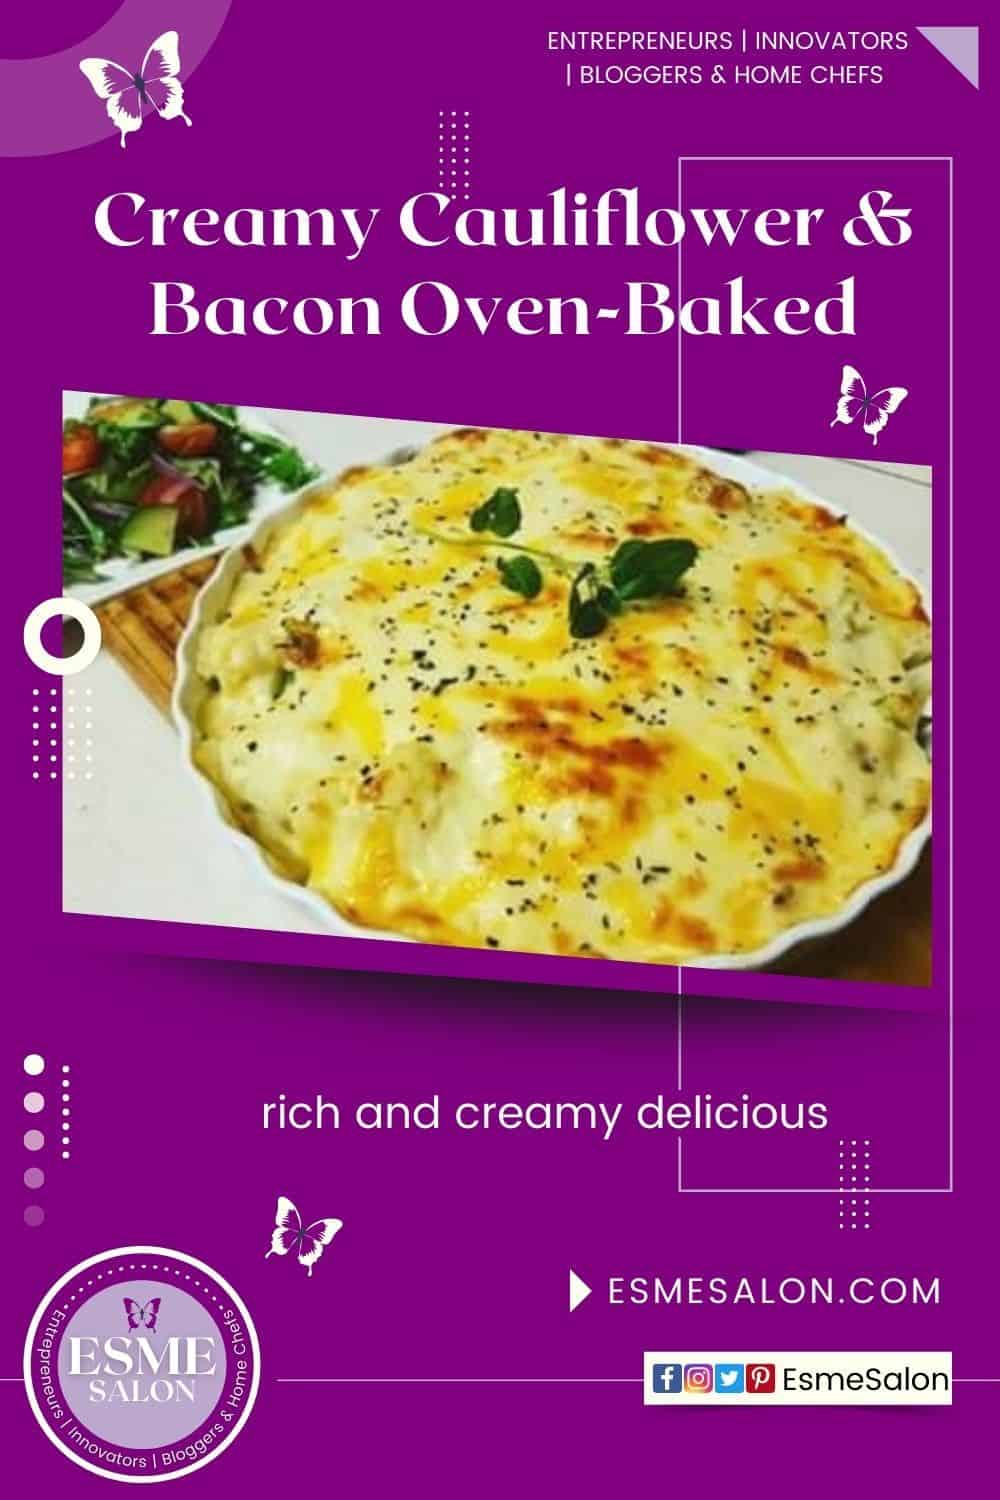 an image of a Creamy Cauliflower & Bacon Oven-Bake in a white round fluted dish